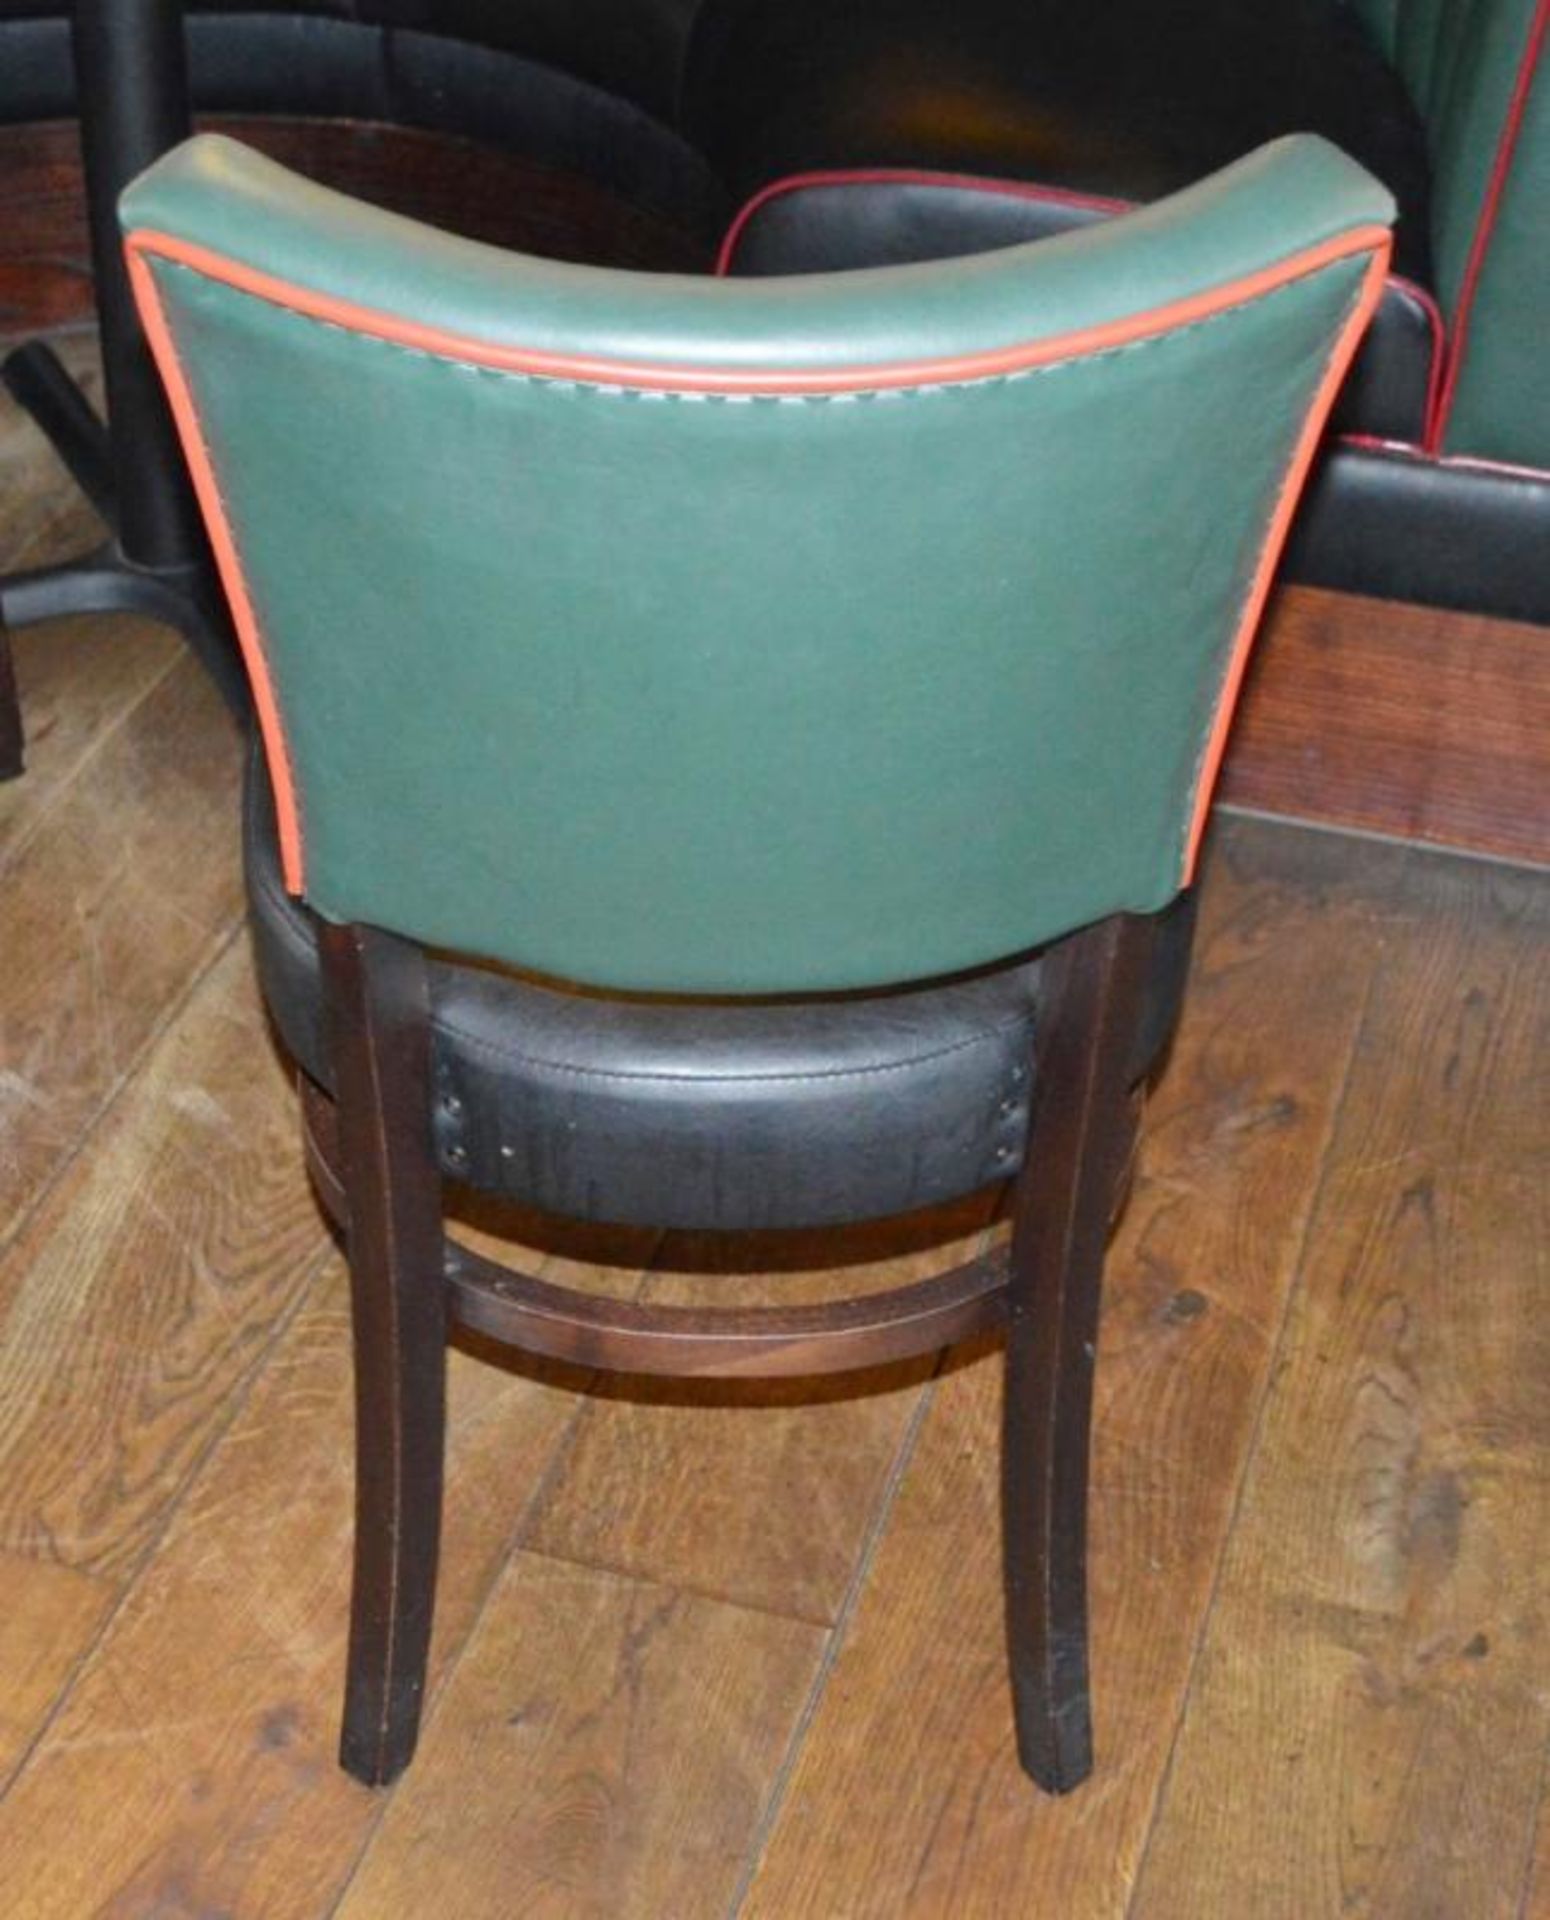 8 x Contemporary Button Back Restaurant Dining Chairs - Upholstered in a Quality Green and Black - Image 4 of 5